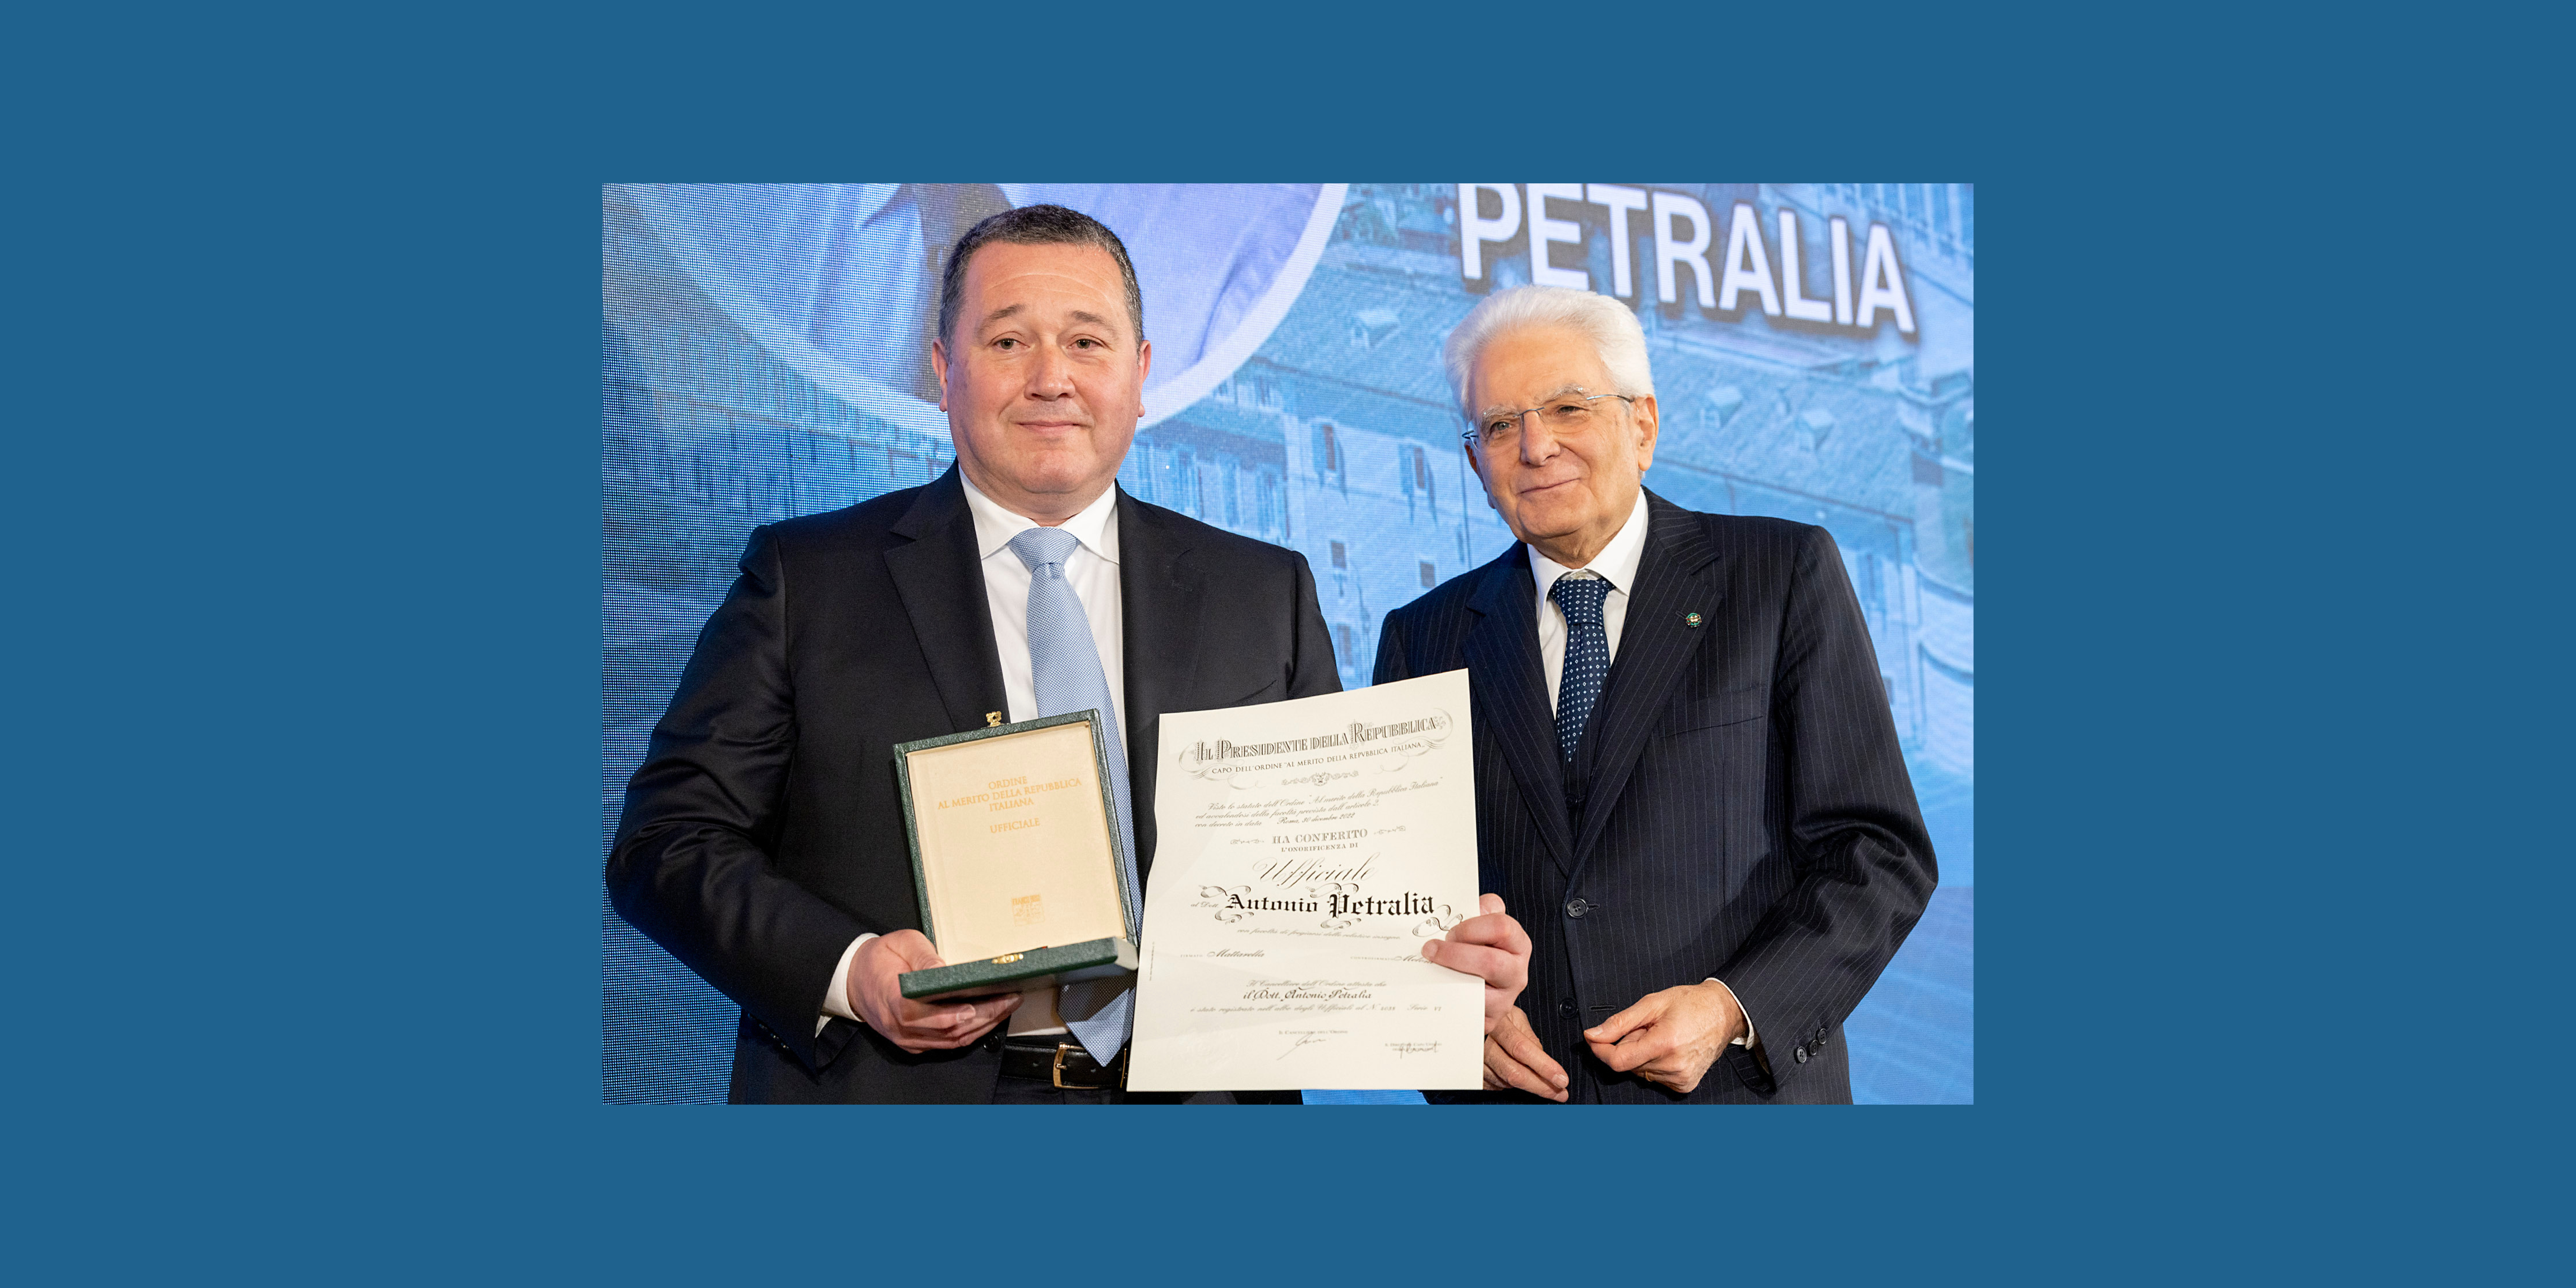 The CEO of Eurosets was honoured by the President of the Republic Sergio Mattarella ‘for realising a gesture of solidarity through his activity as an entrepreneur